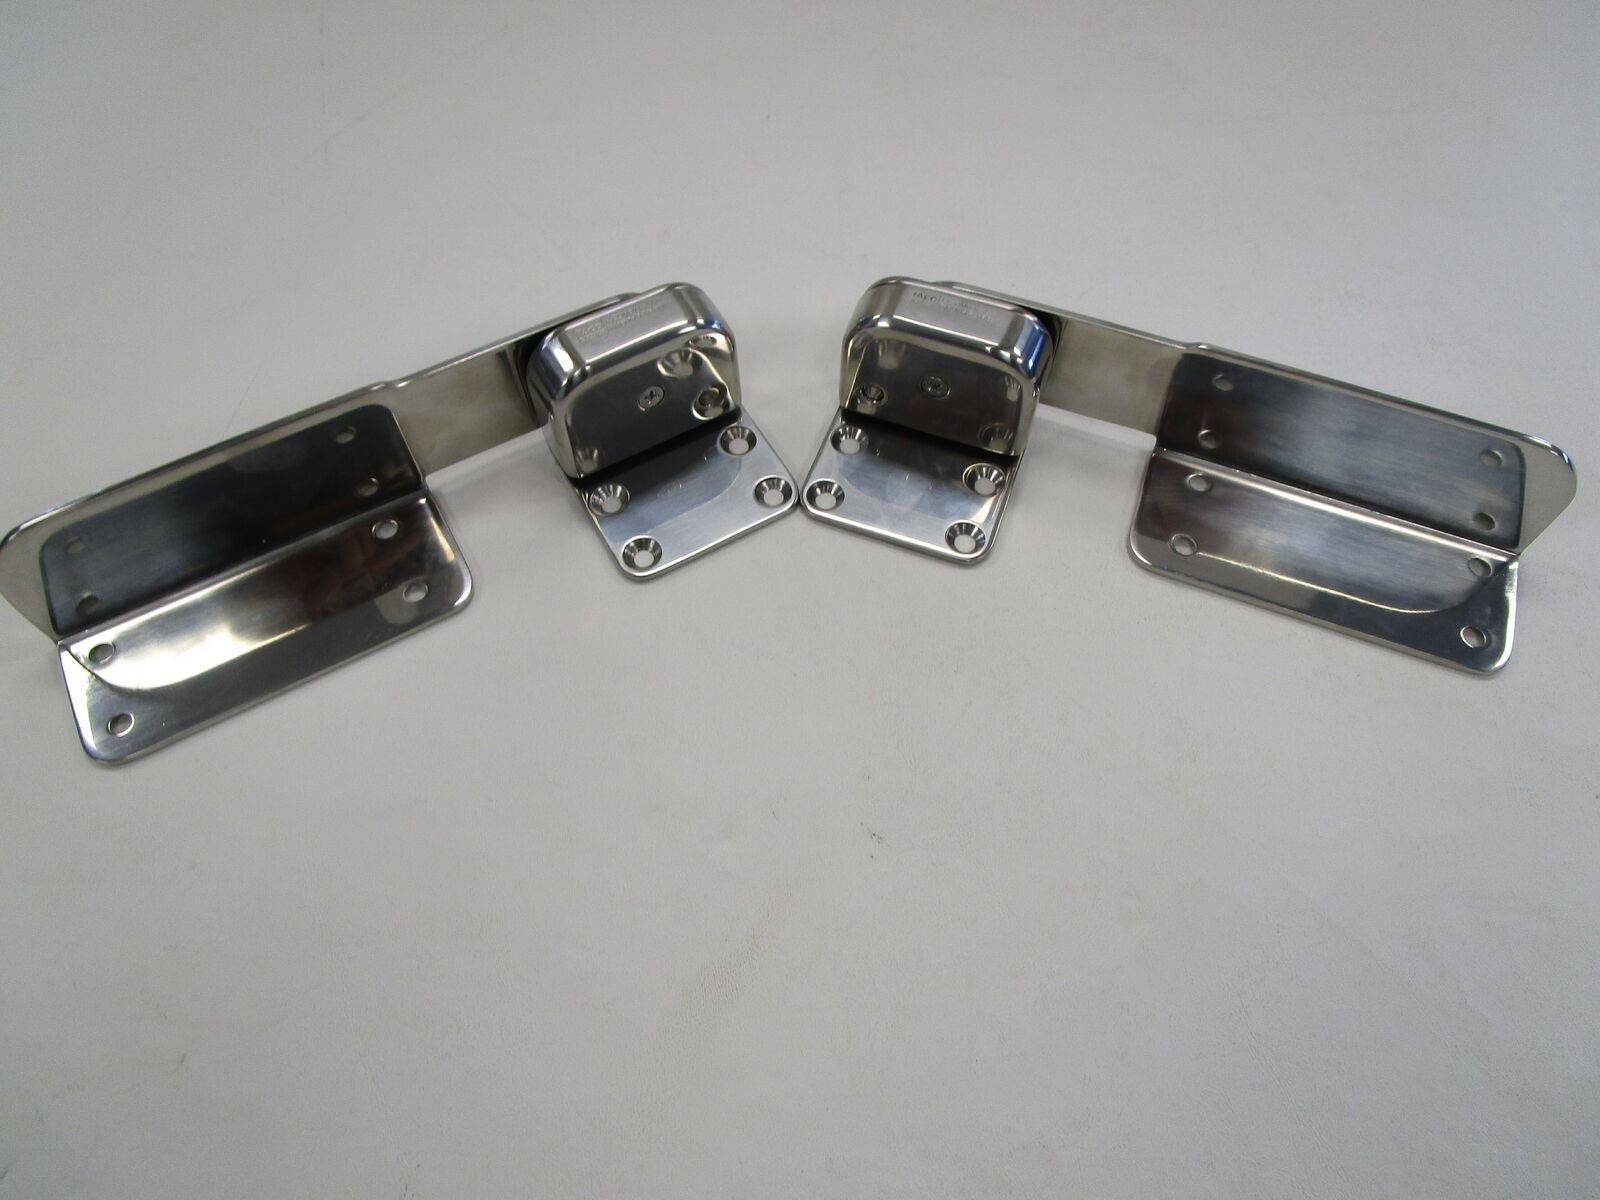 TACO METALS PAIR (2) COMMAND RATCHET SEAT HINGE STAINLESS STEEL MARINE BOAT